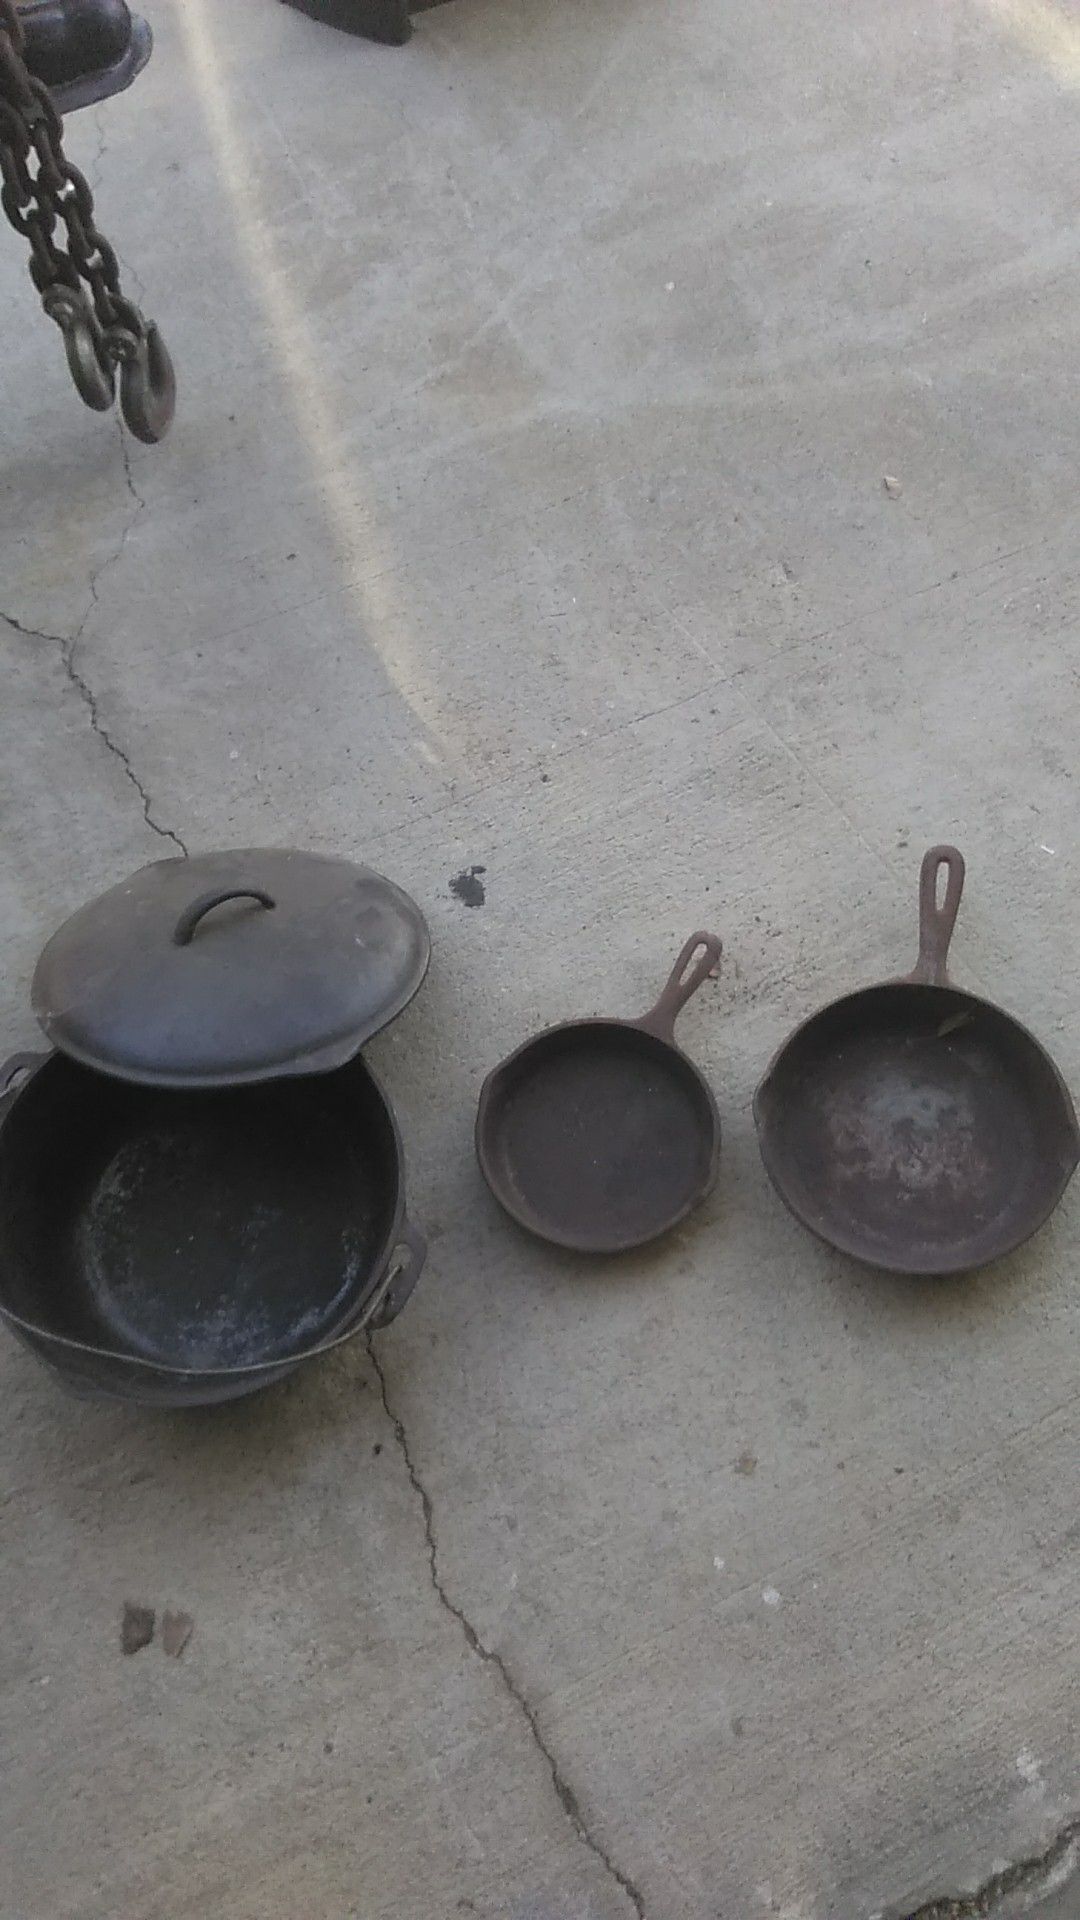 Camping cooking pots